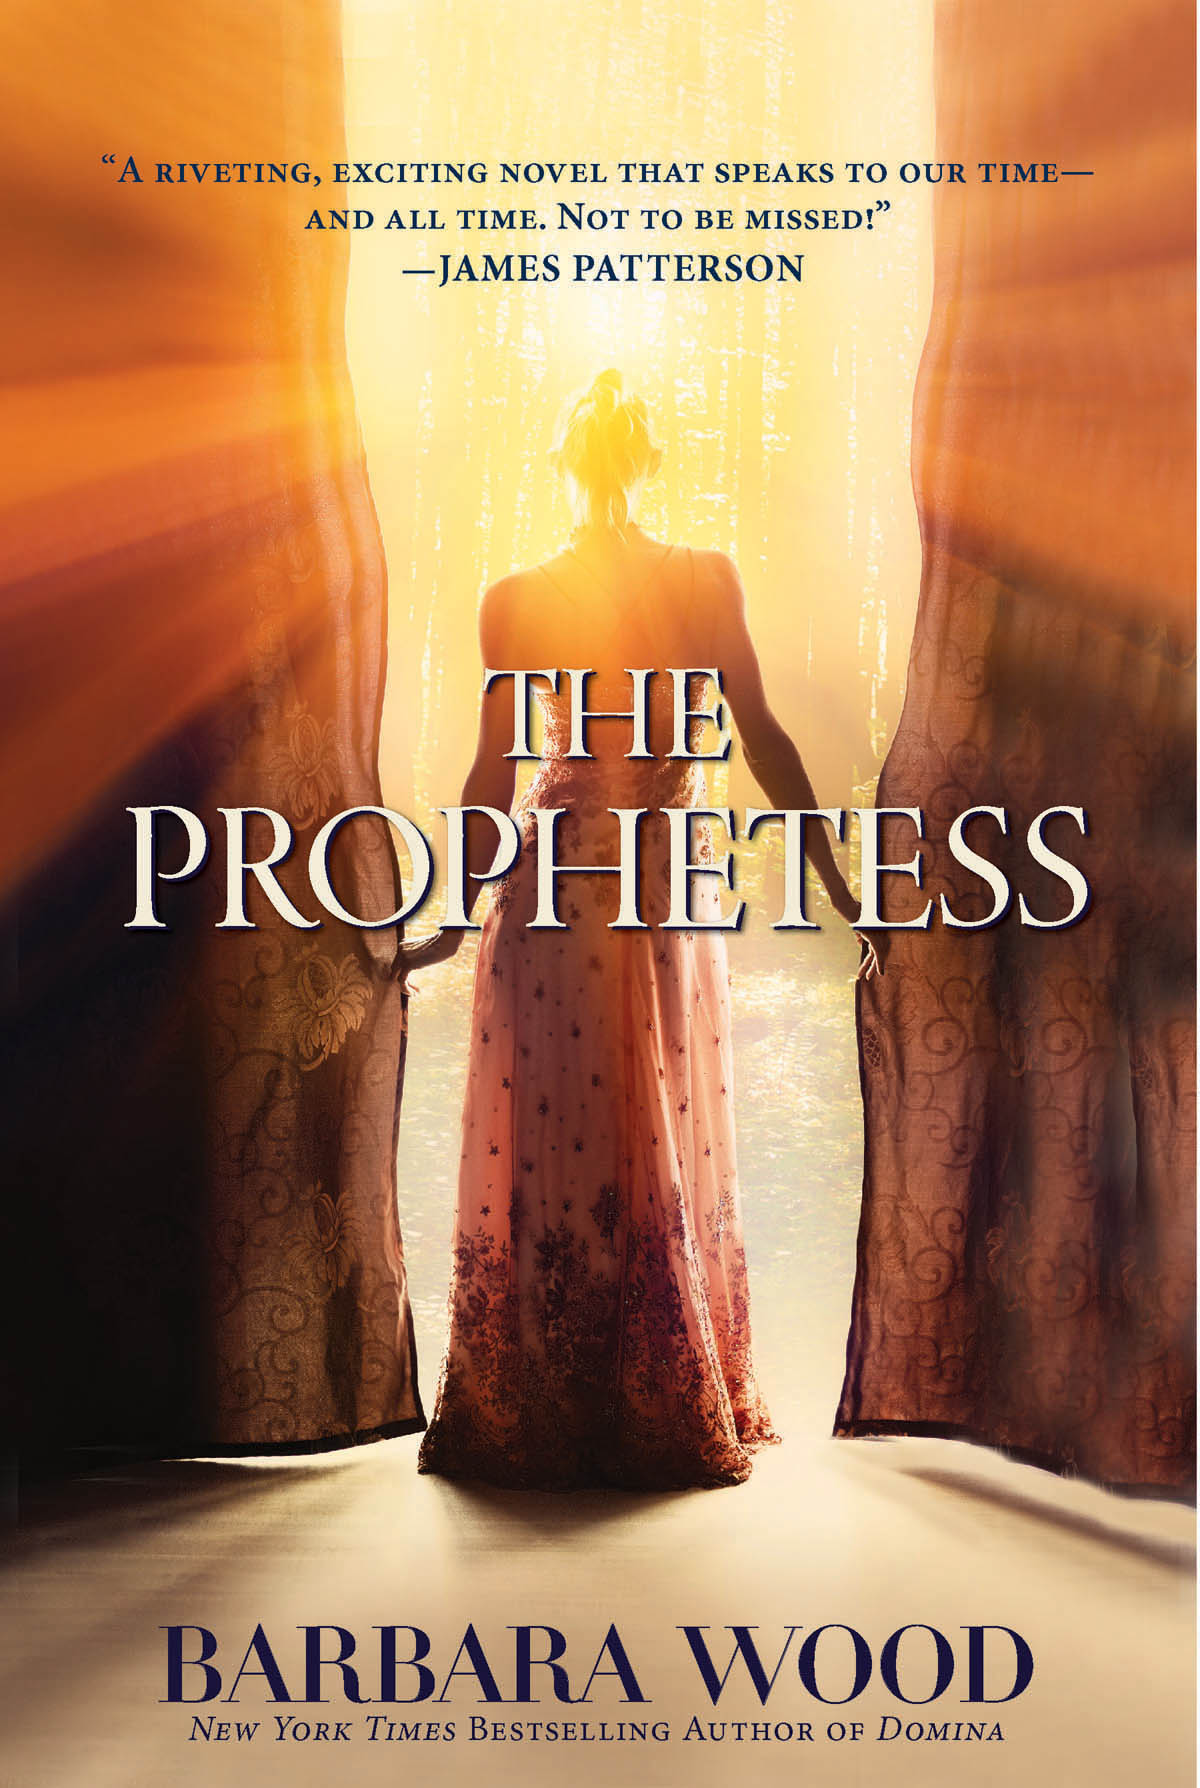 The Prophetess by Barbara Wood